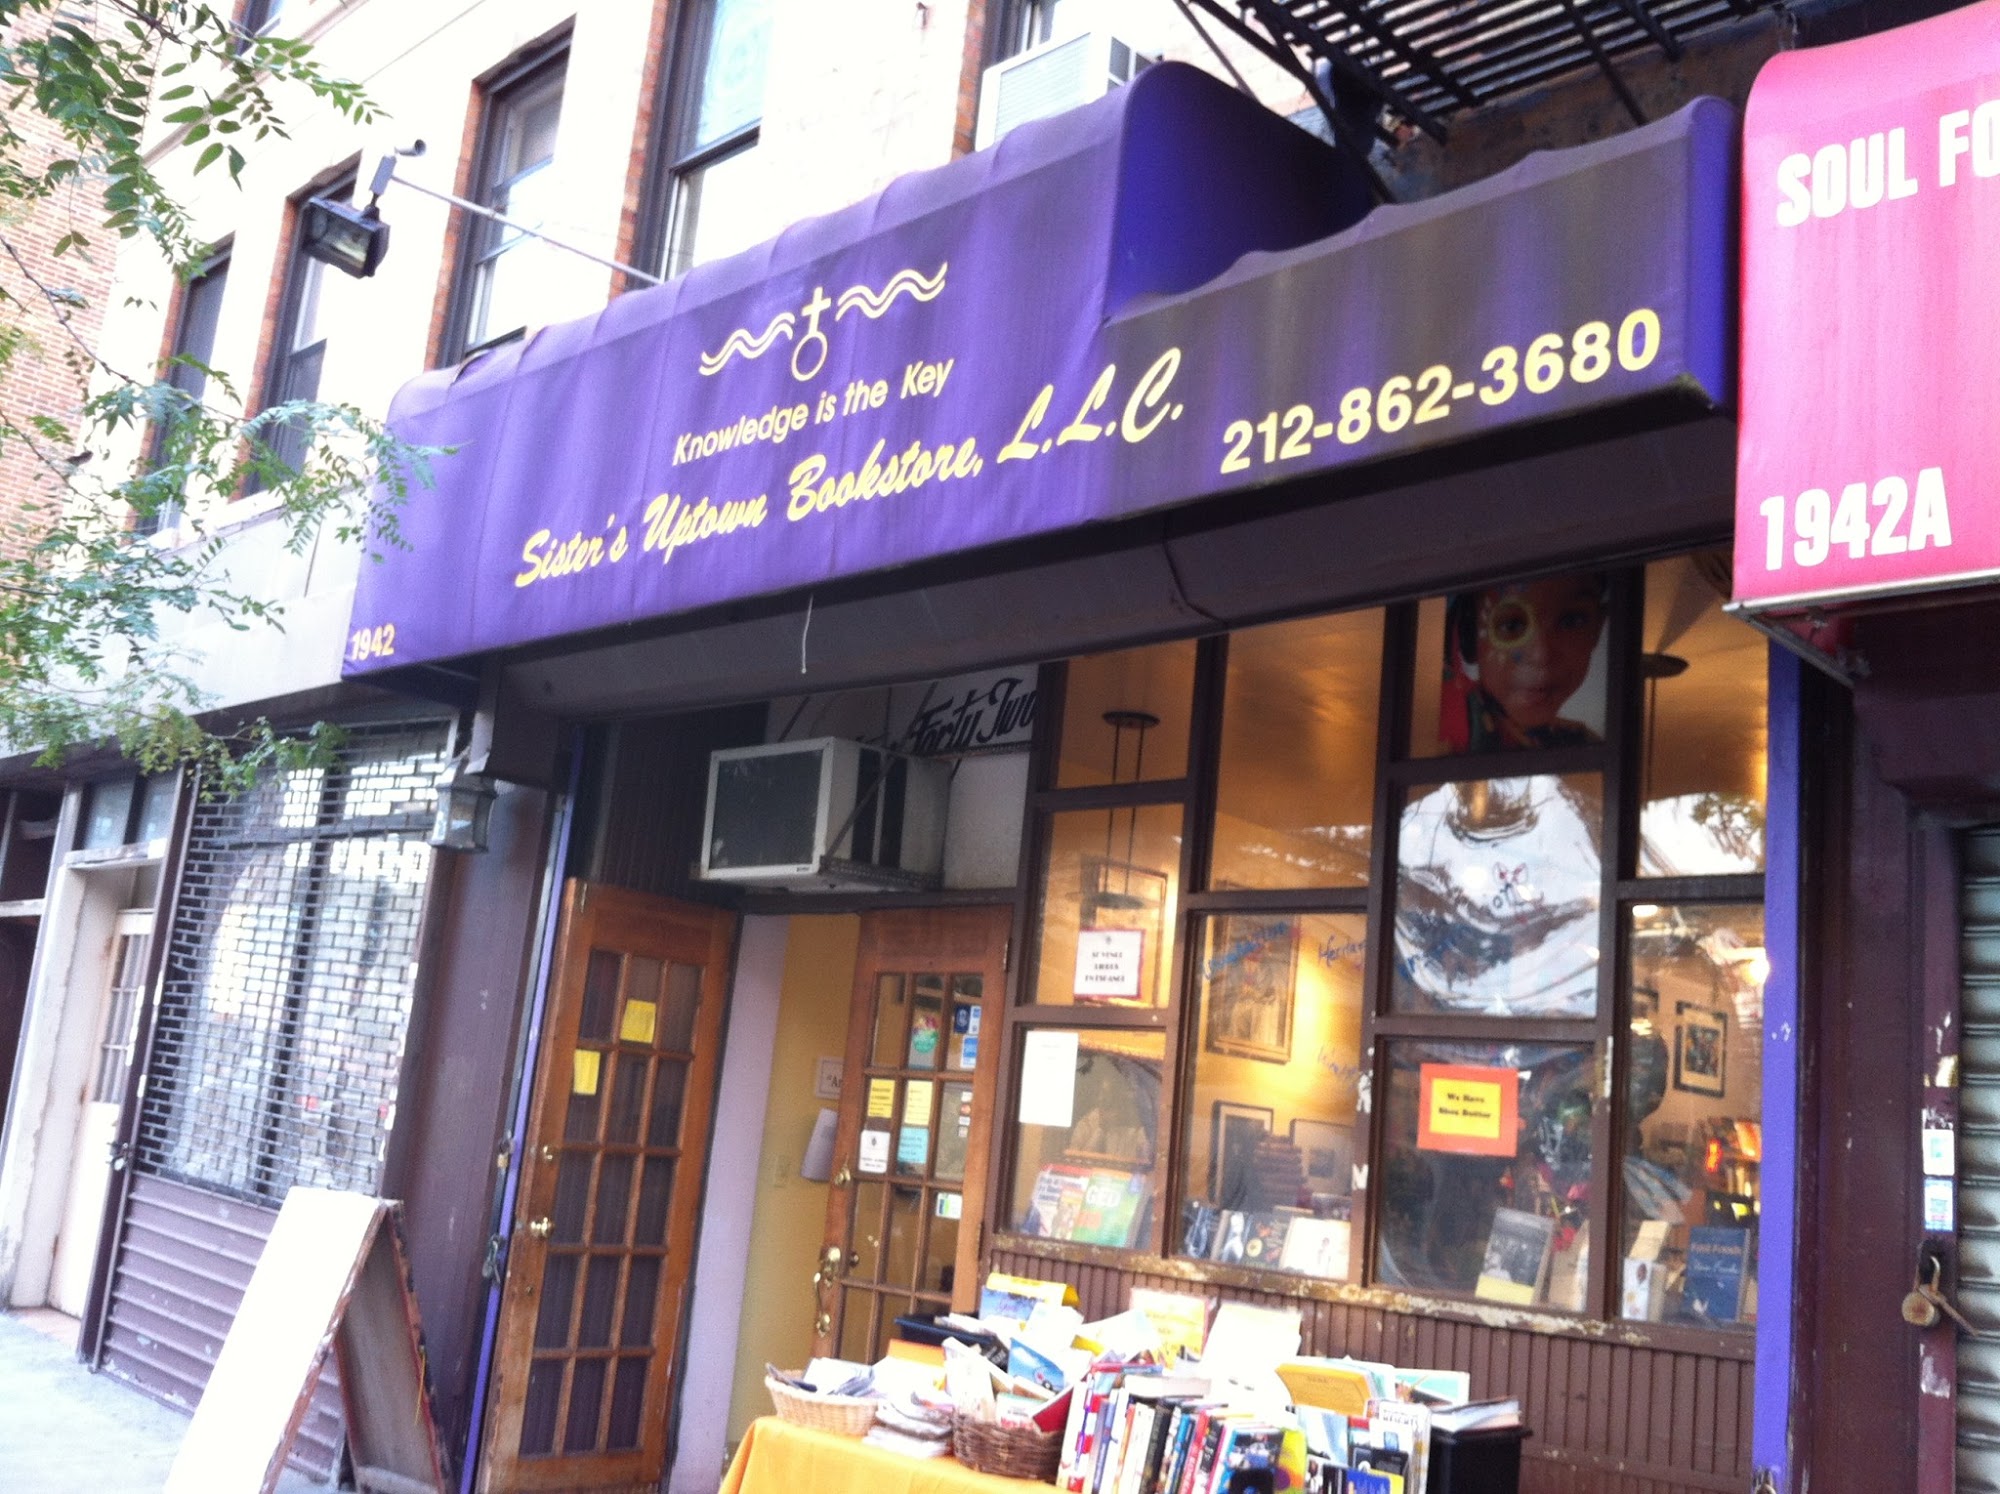 Sister's Uptown Bookstore